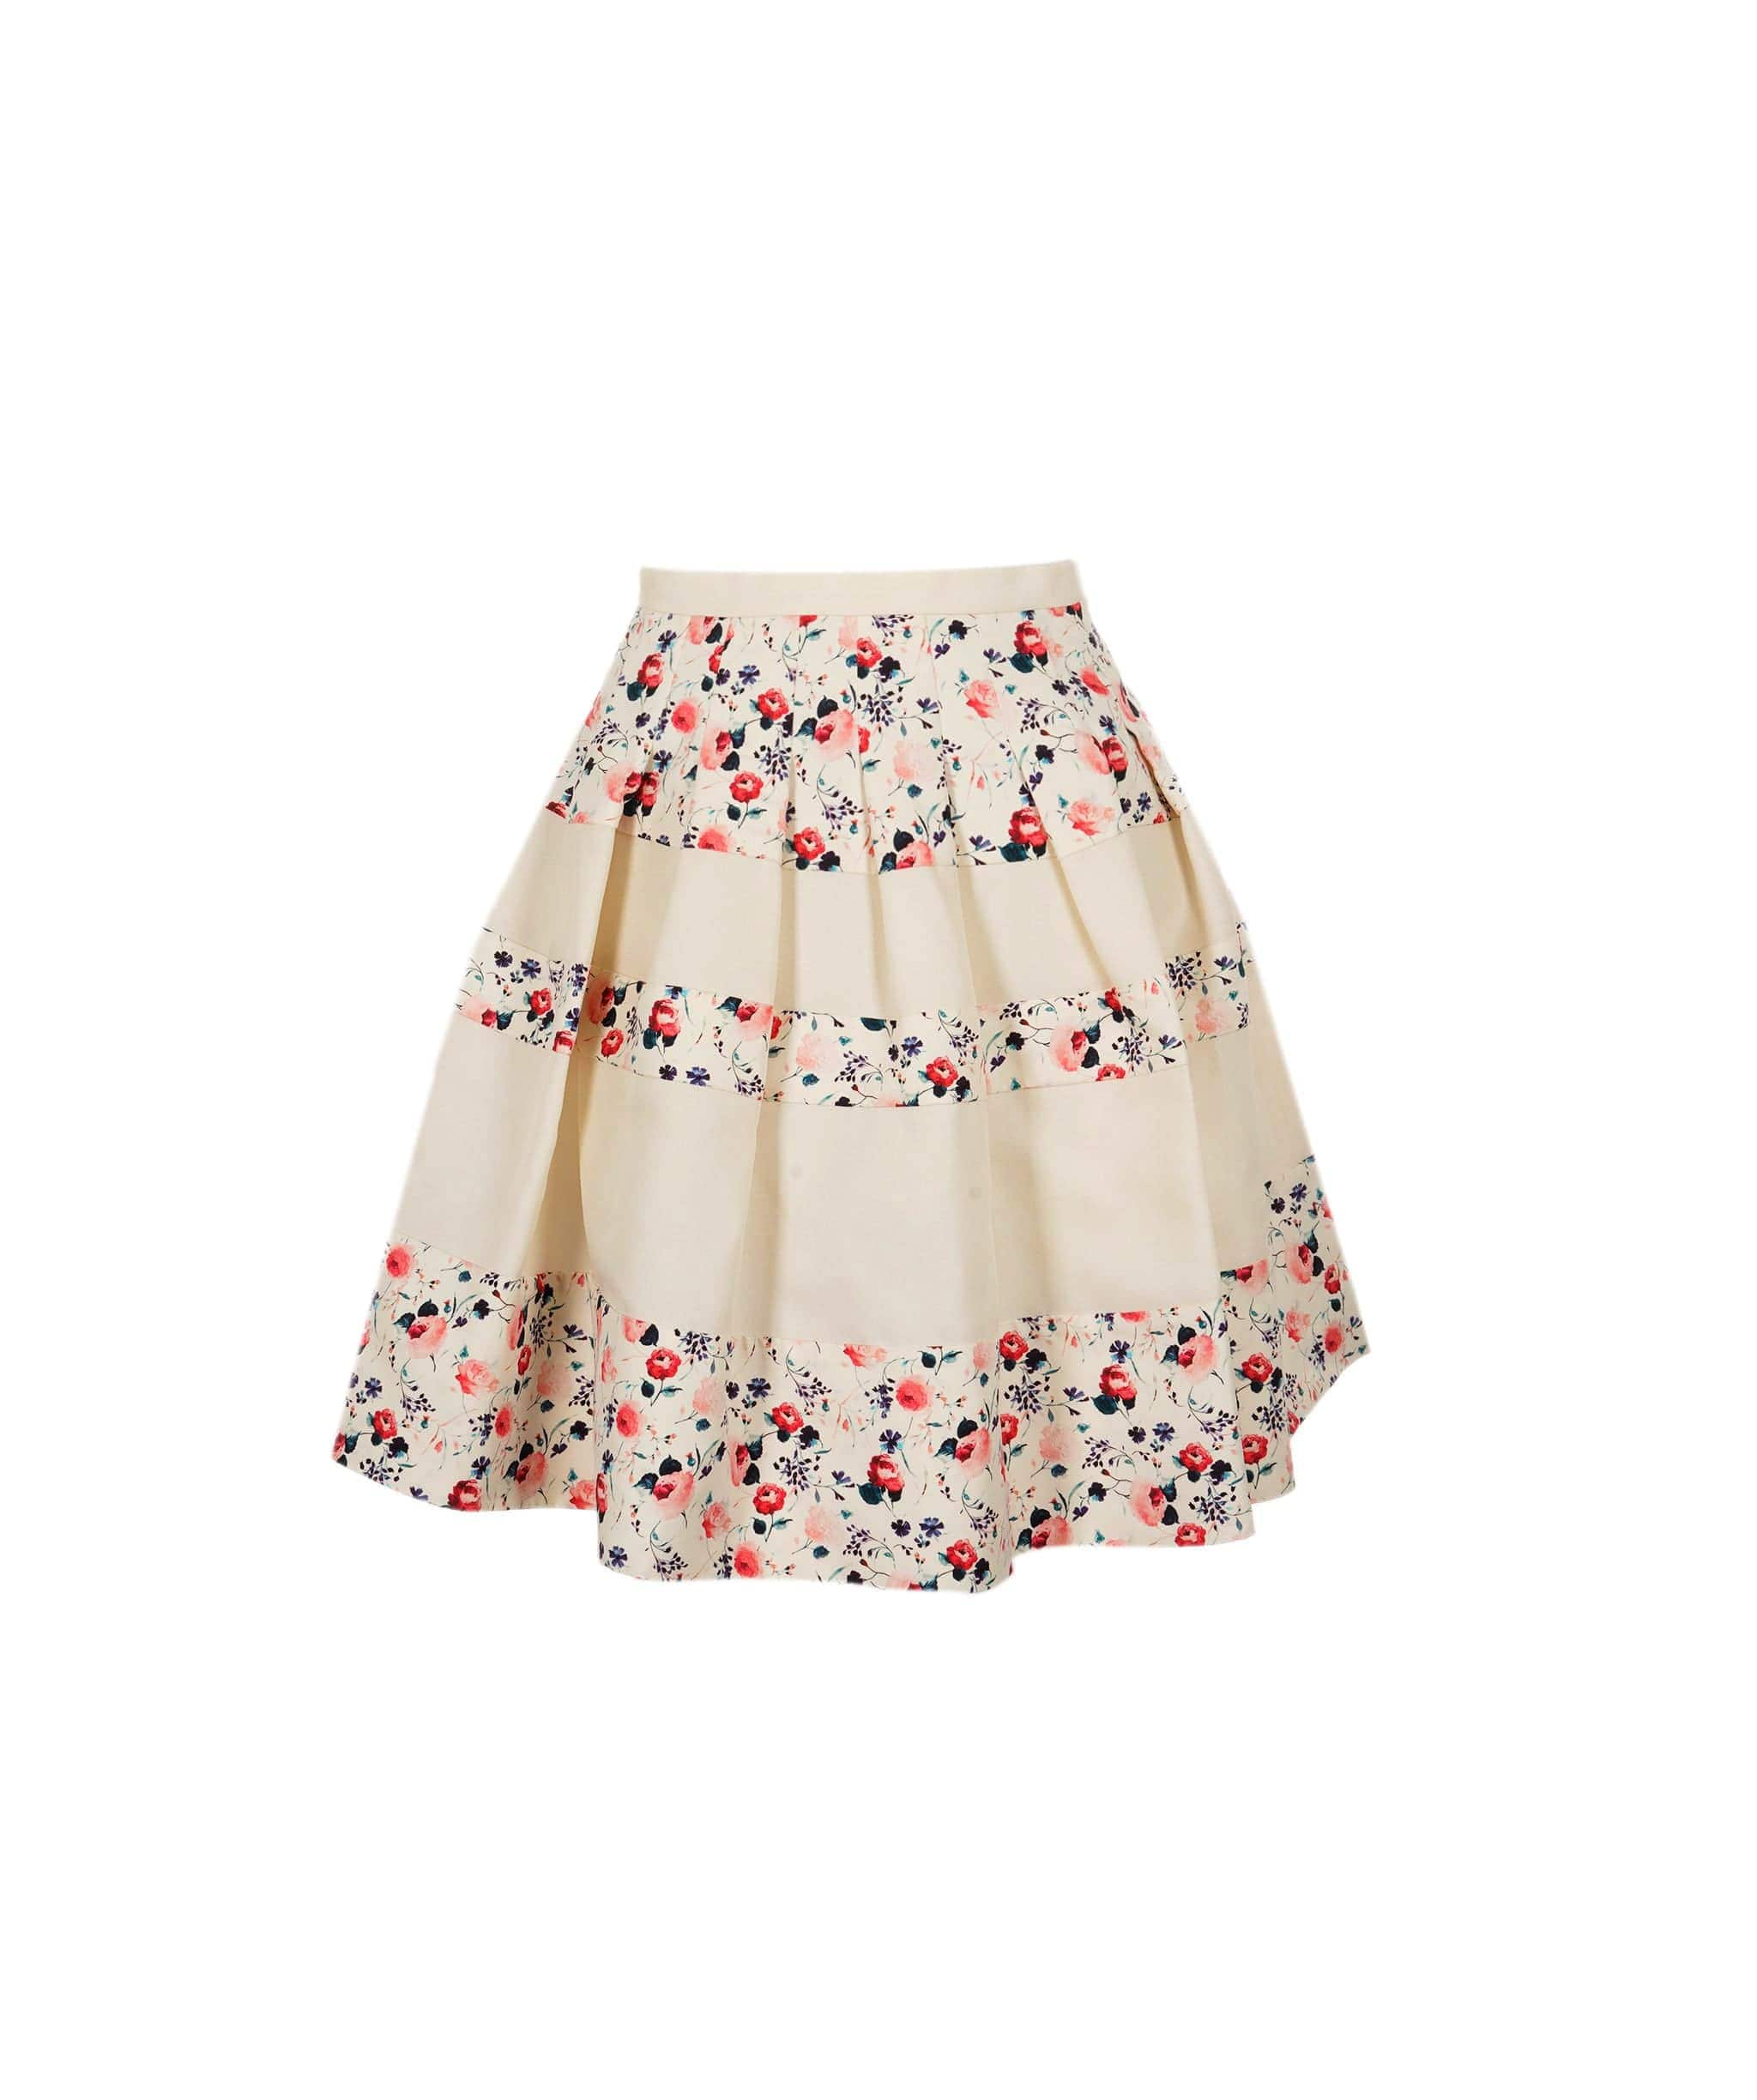 Christian Dior Dior Skirt white with flowers FR38 AVC1264